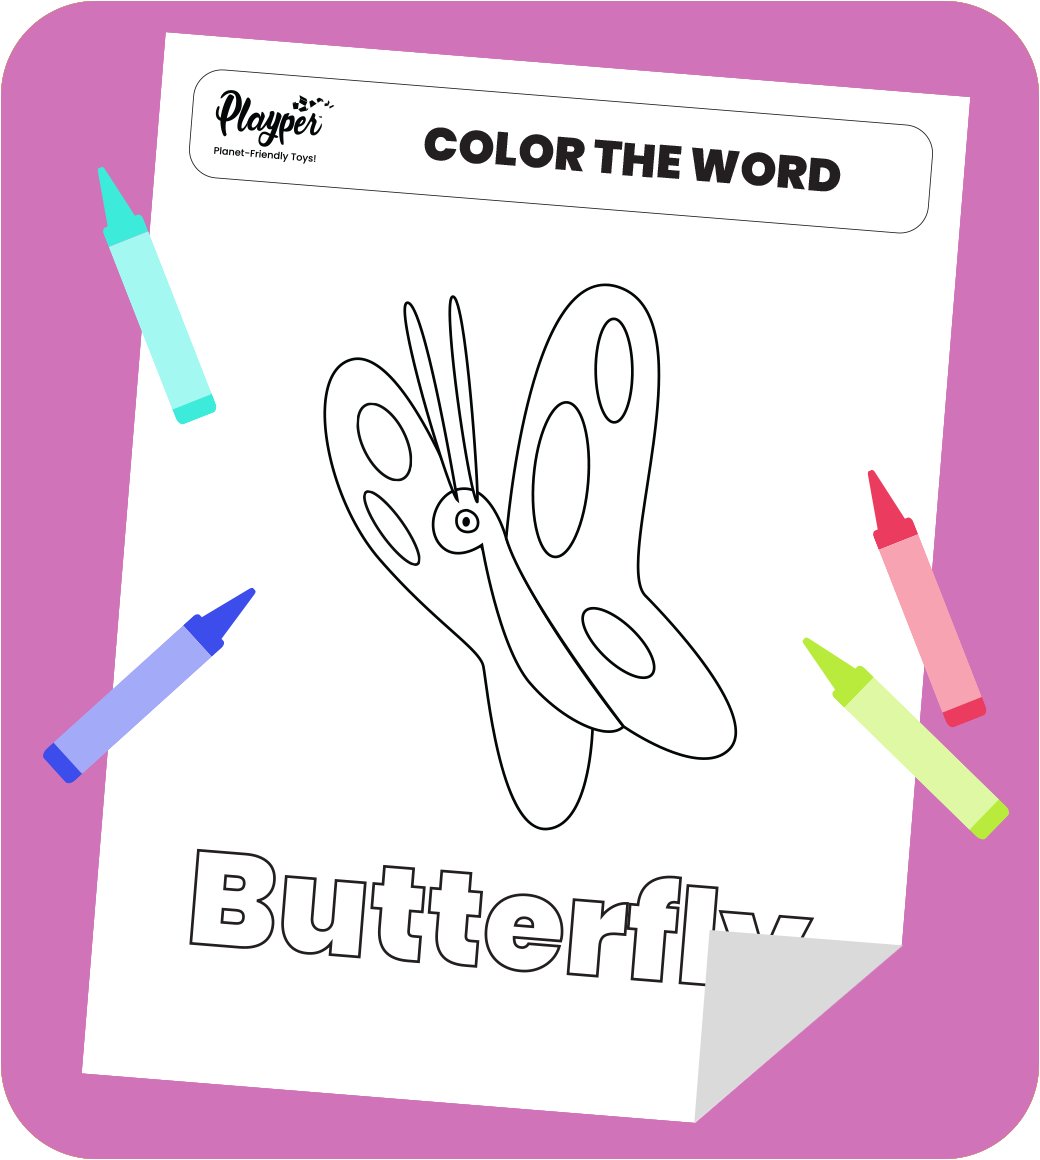 Spring is here! Celebrate with this friendly butterfly! This one and more fun at: playper.com/pages/printabl…⁠ ⁠ #spring #springtimeactivities #butterflies #printables #freeprintables #worksheets #kidsactivities #dadtime #familytime #funlearning